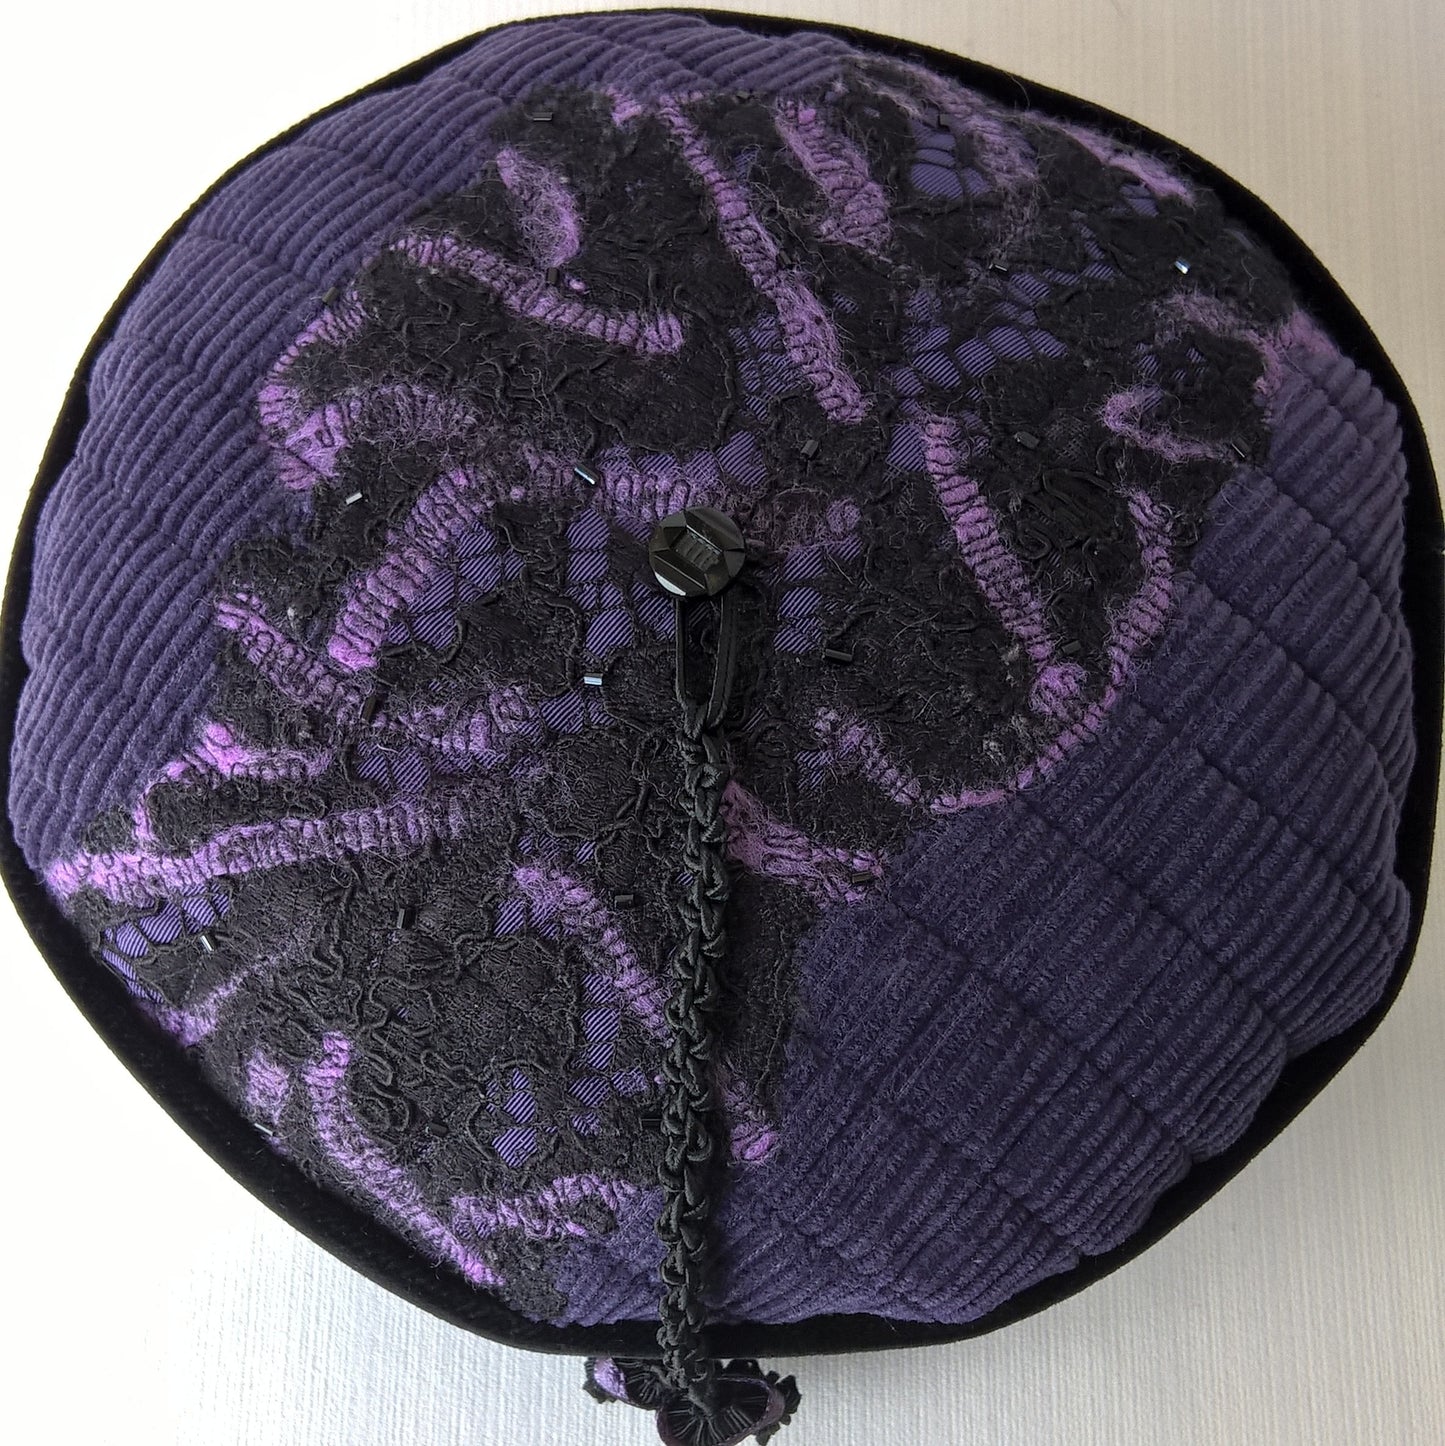 A combination of needle and wet felting is used to combine lace and wool tops on the tip of the smoking cap, and finished with beading